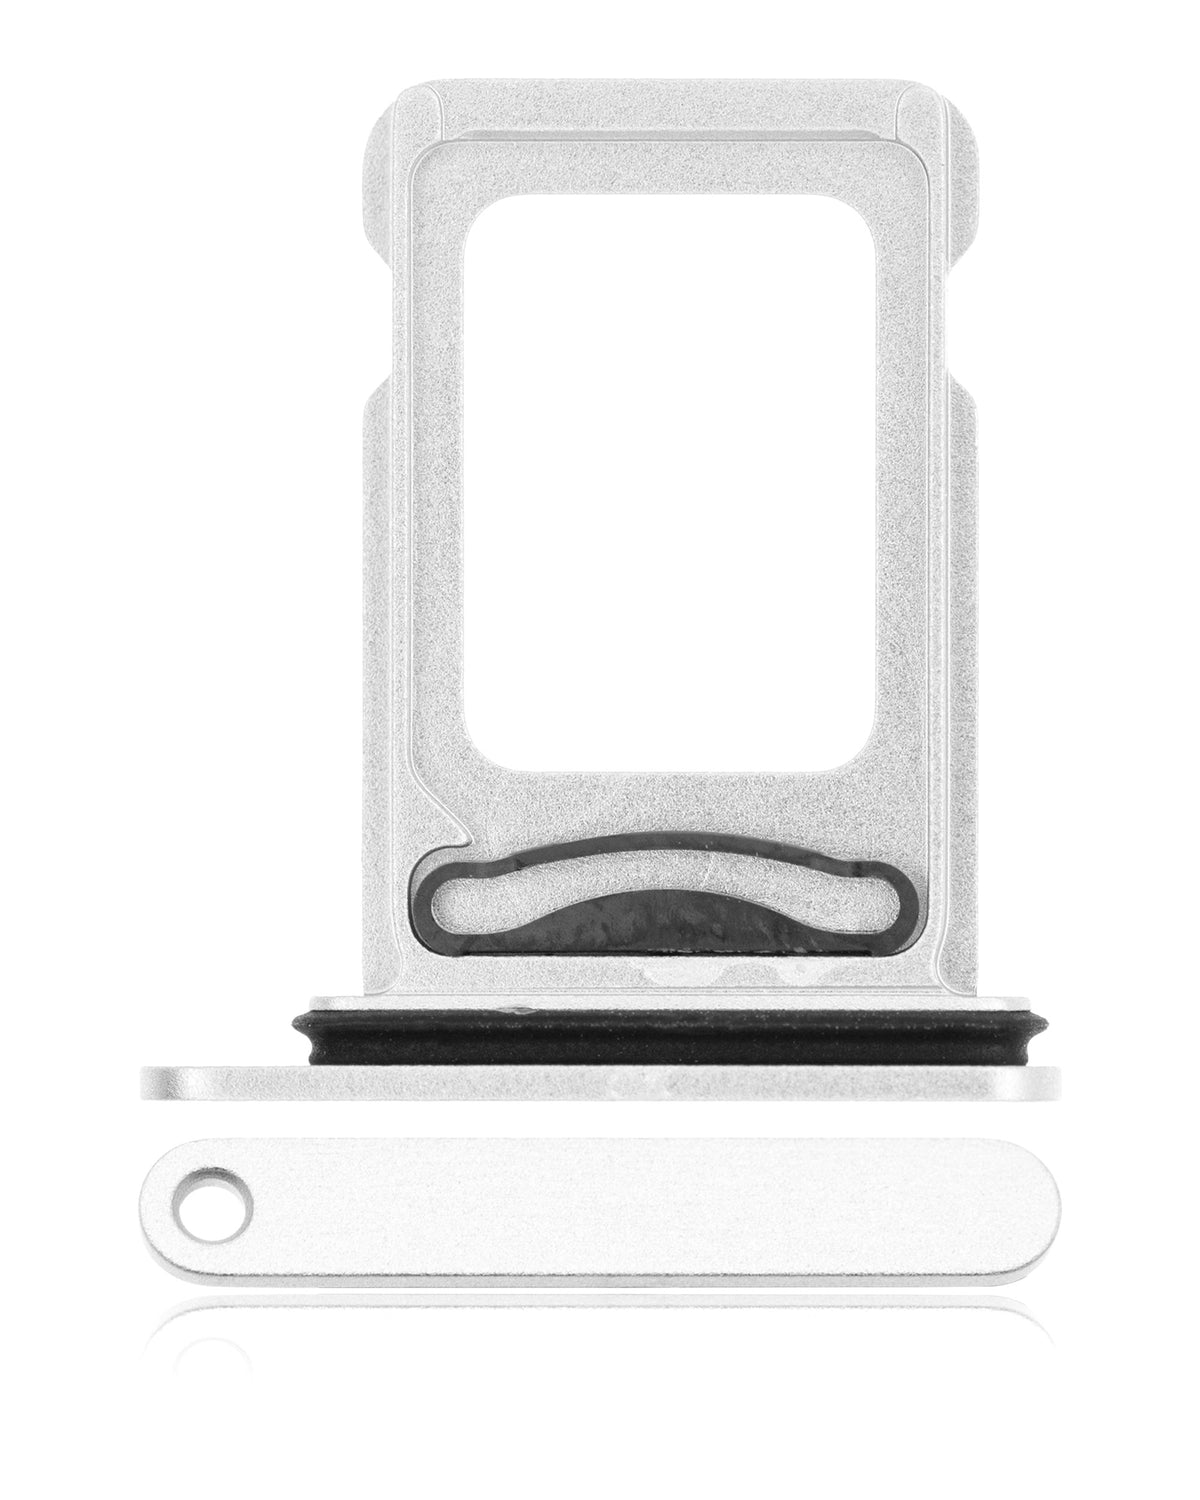 GREEN DUAL SIM CARD TRAY COMPATIBLE WITH IPHONE 12